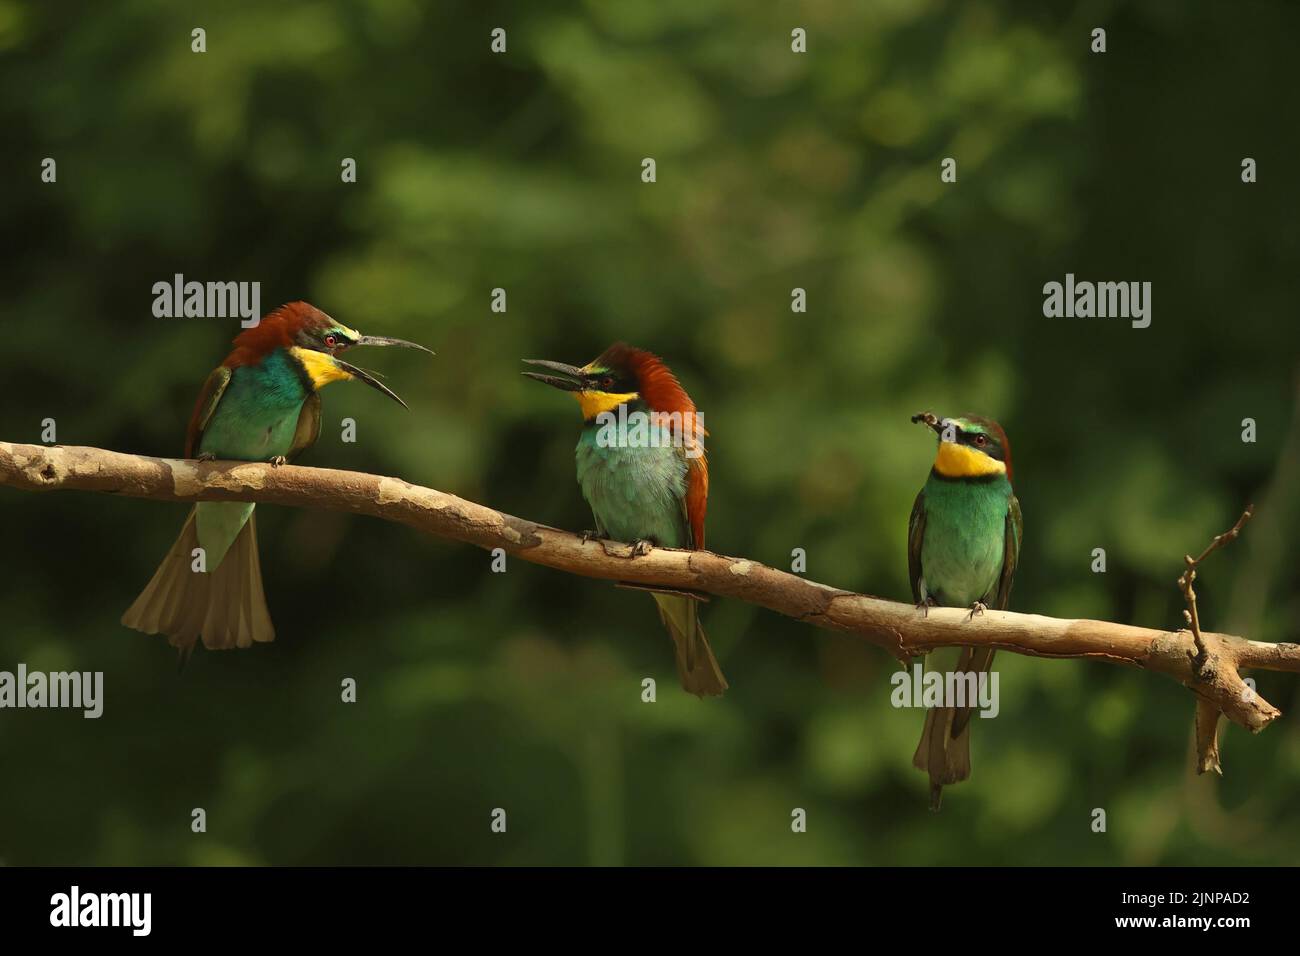 European bee-eaters (Merops apiaster) interact on where one may sit; they are highly social colorful birds. Stock Photo